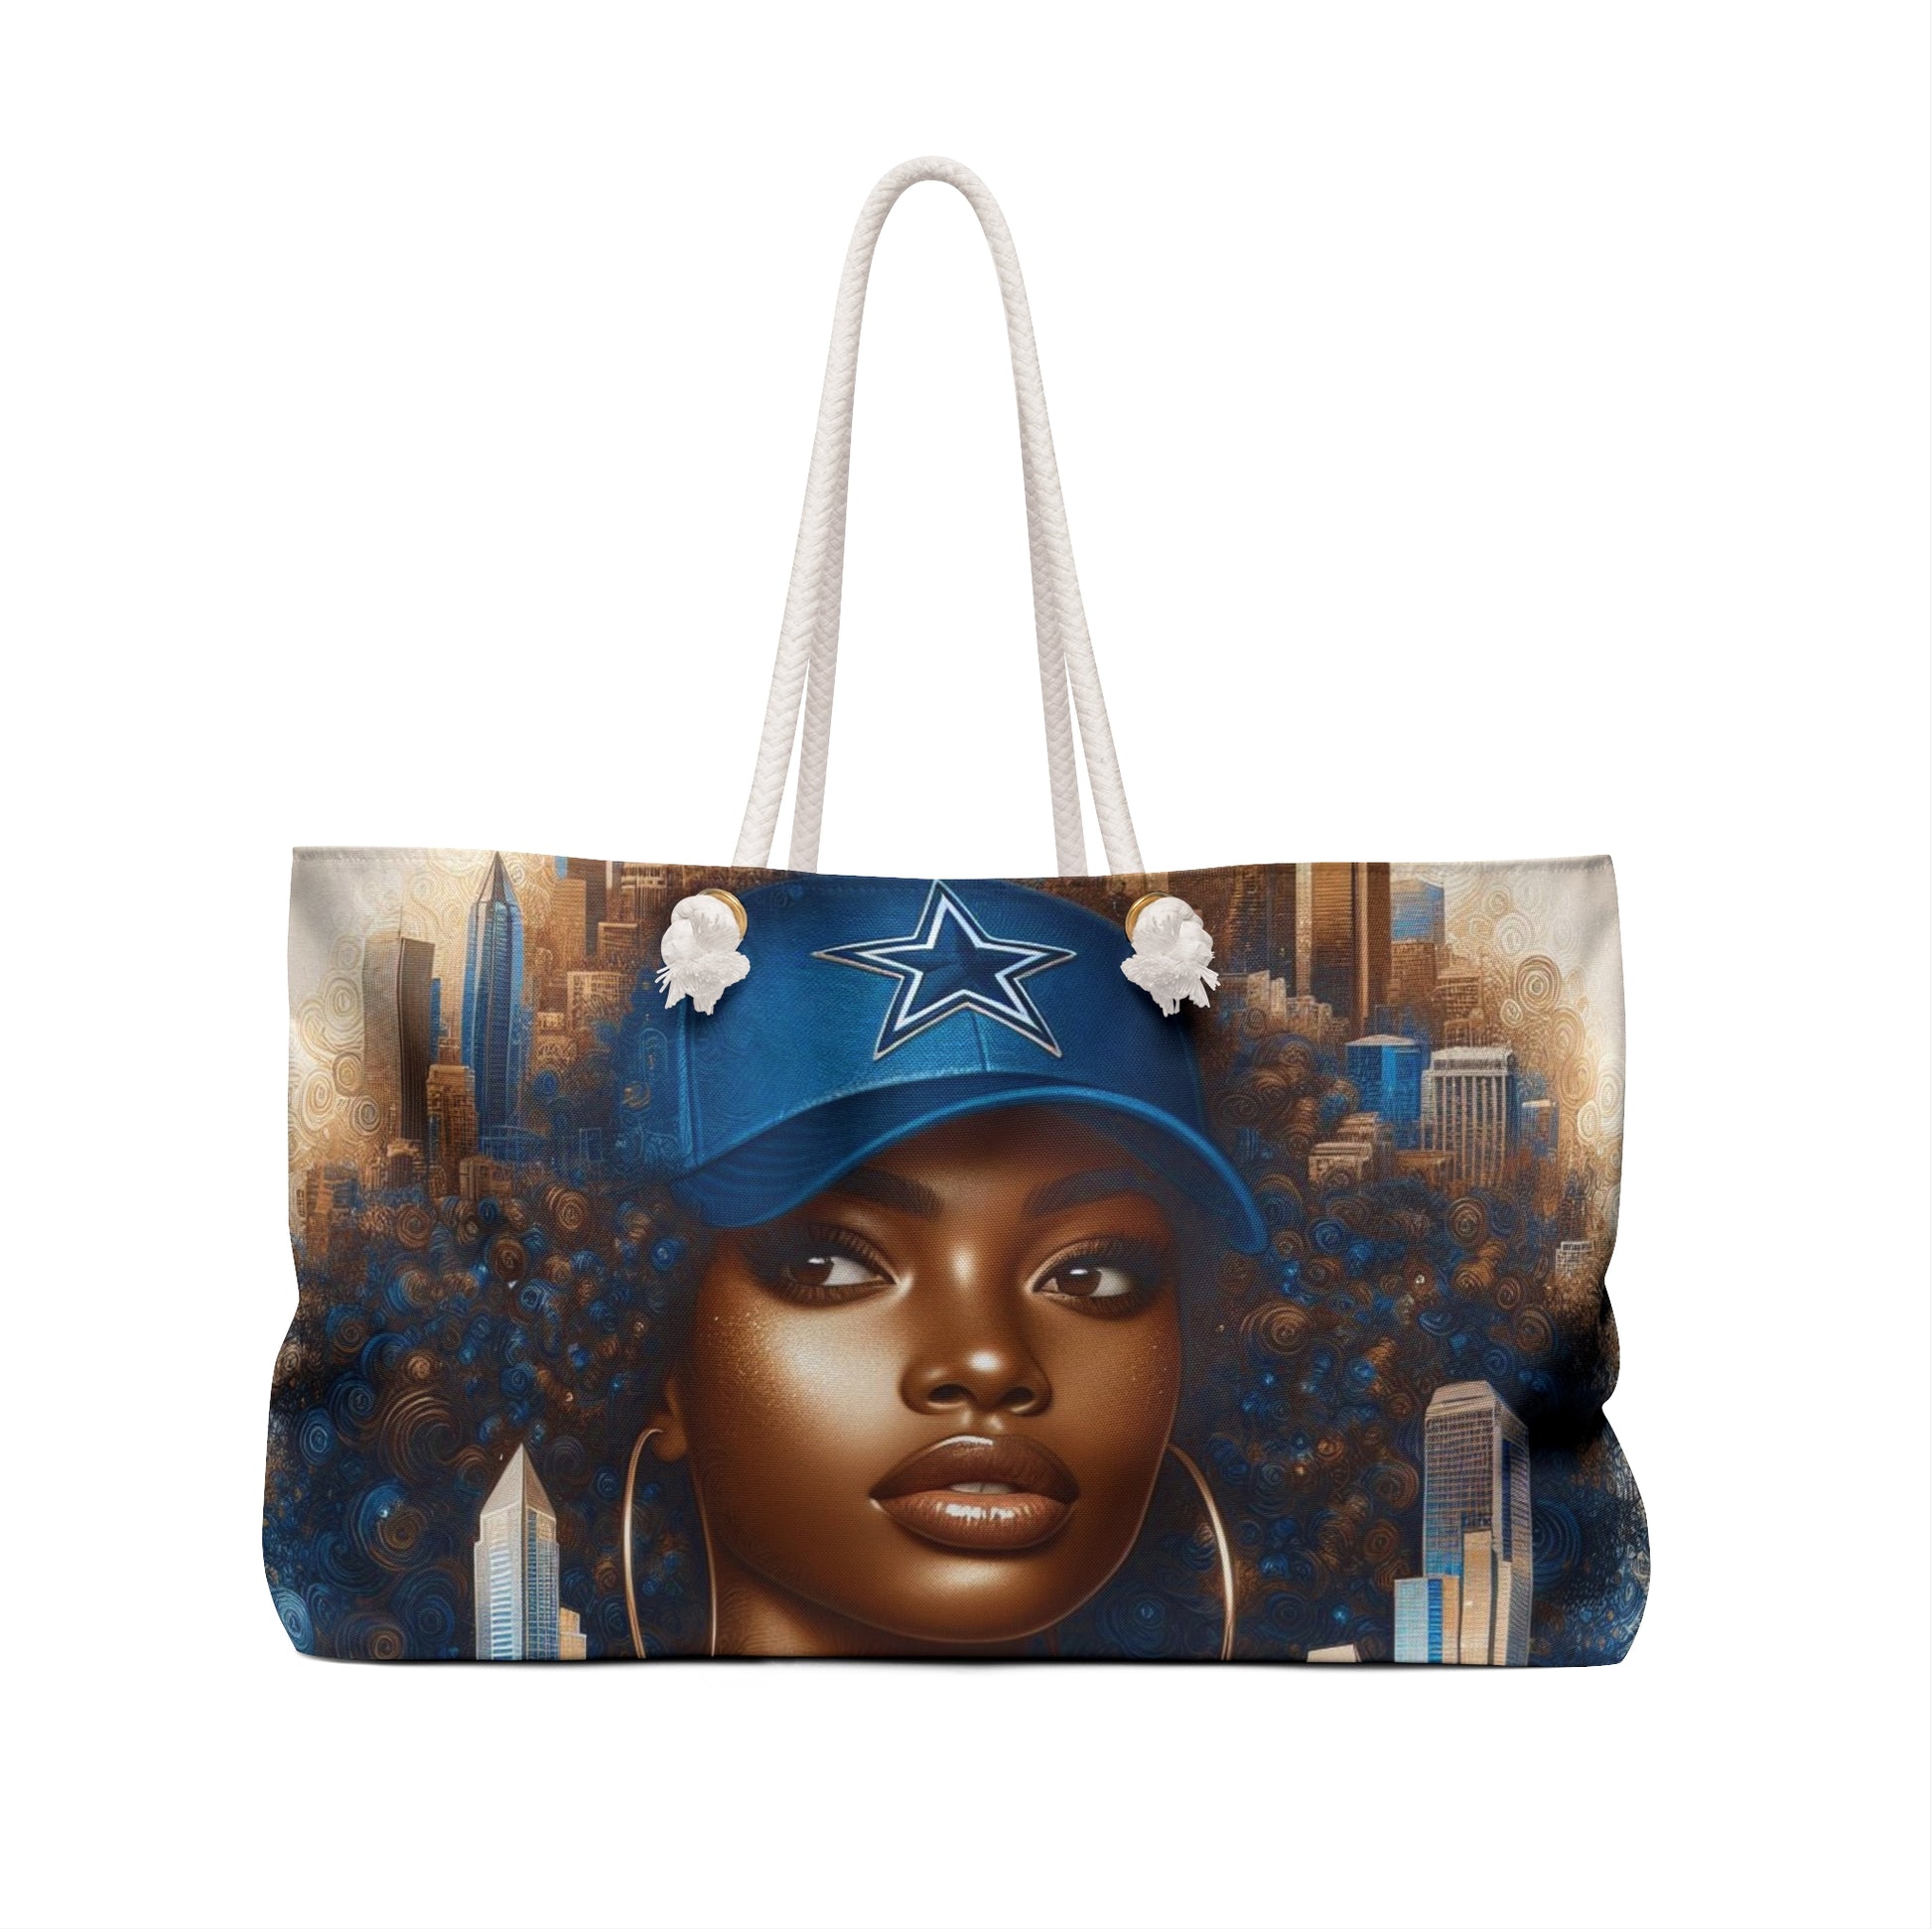 Tote bag with a Black woman in a Blue base ball cap with the City of Dallas in the background.